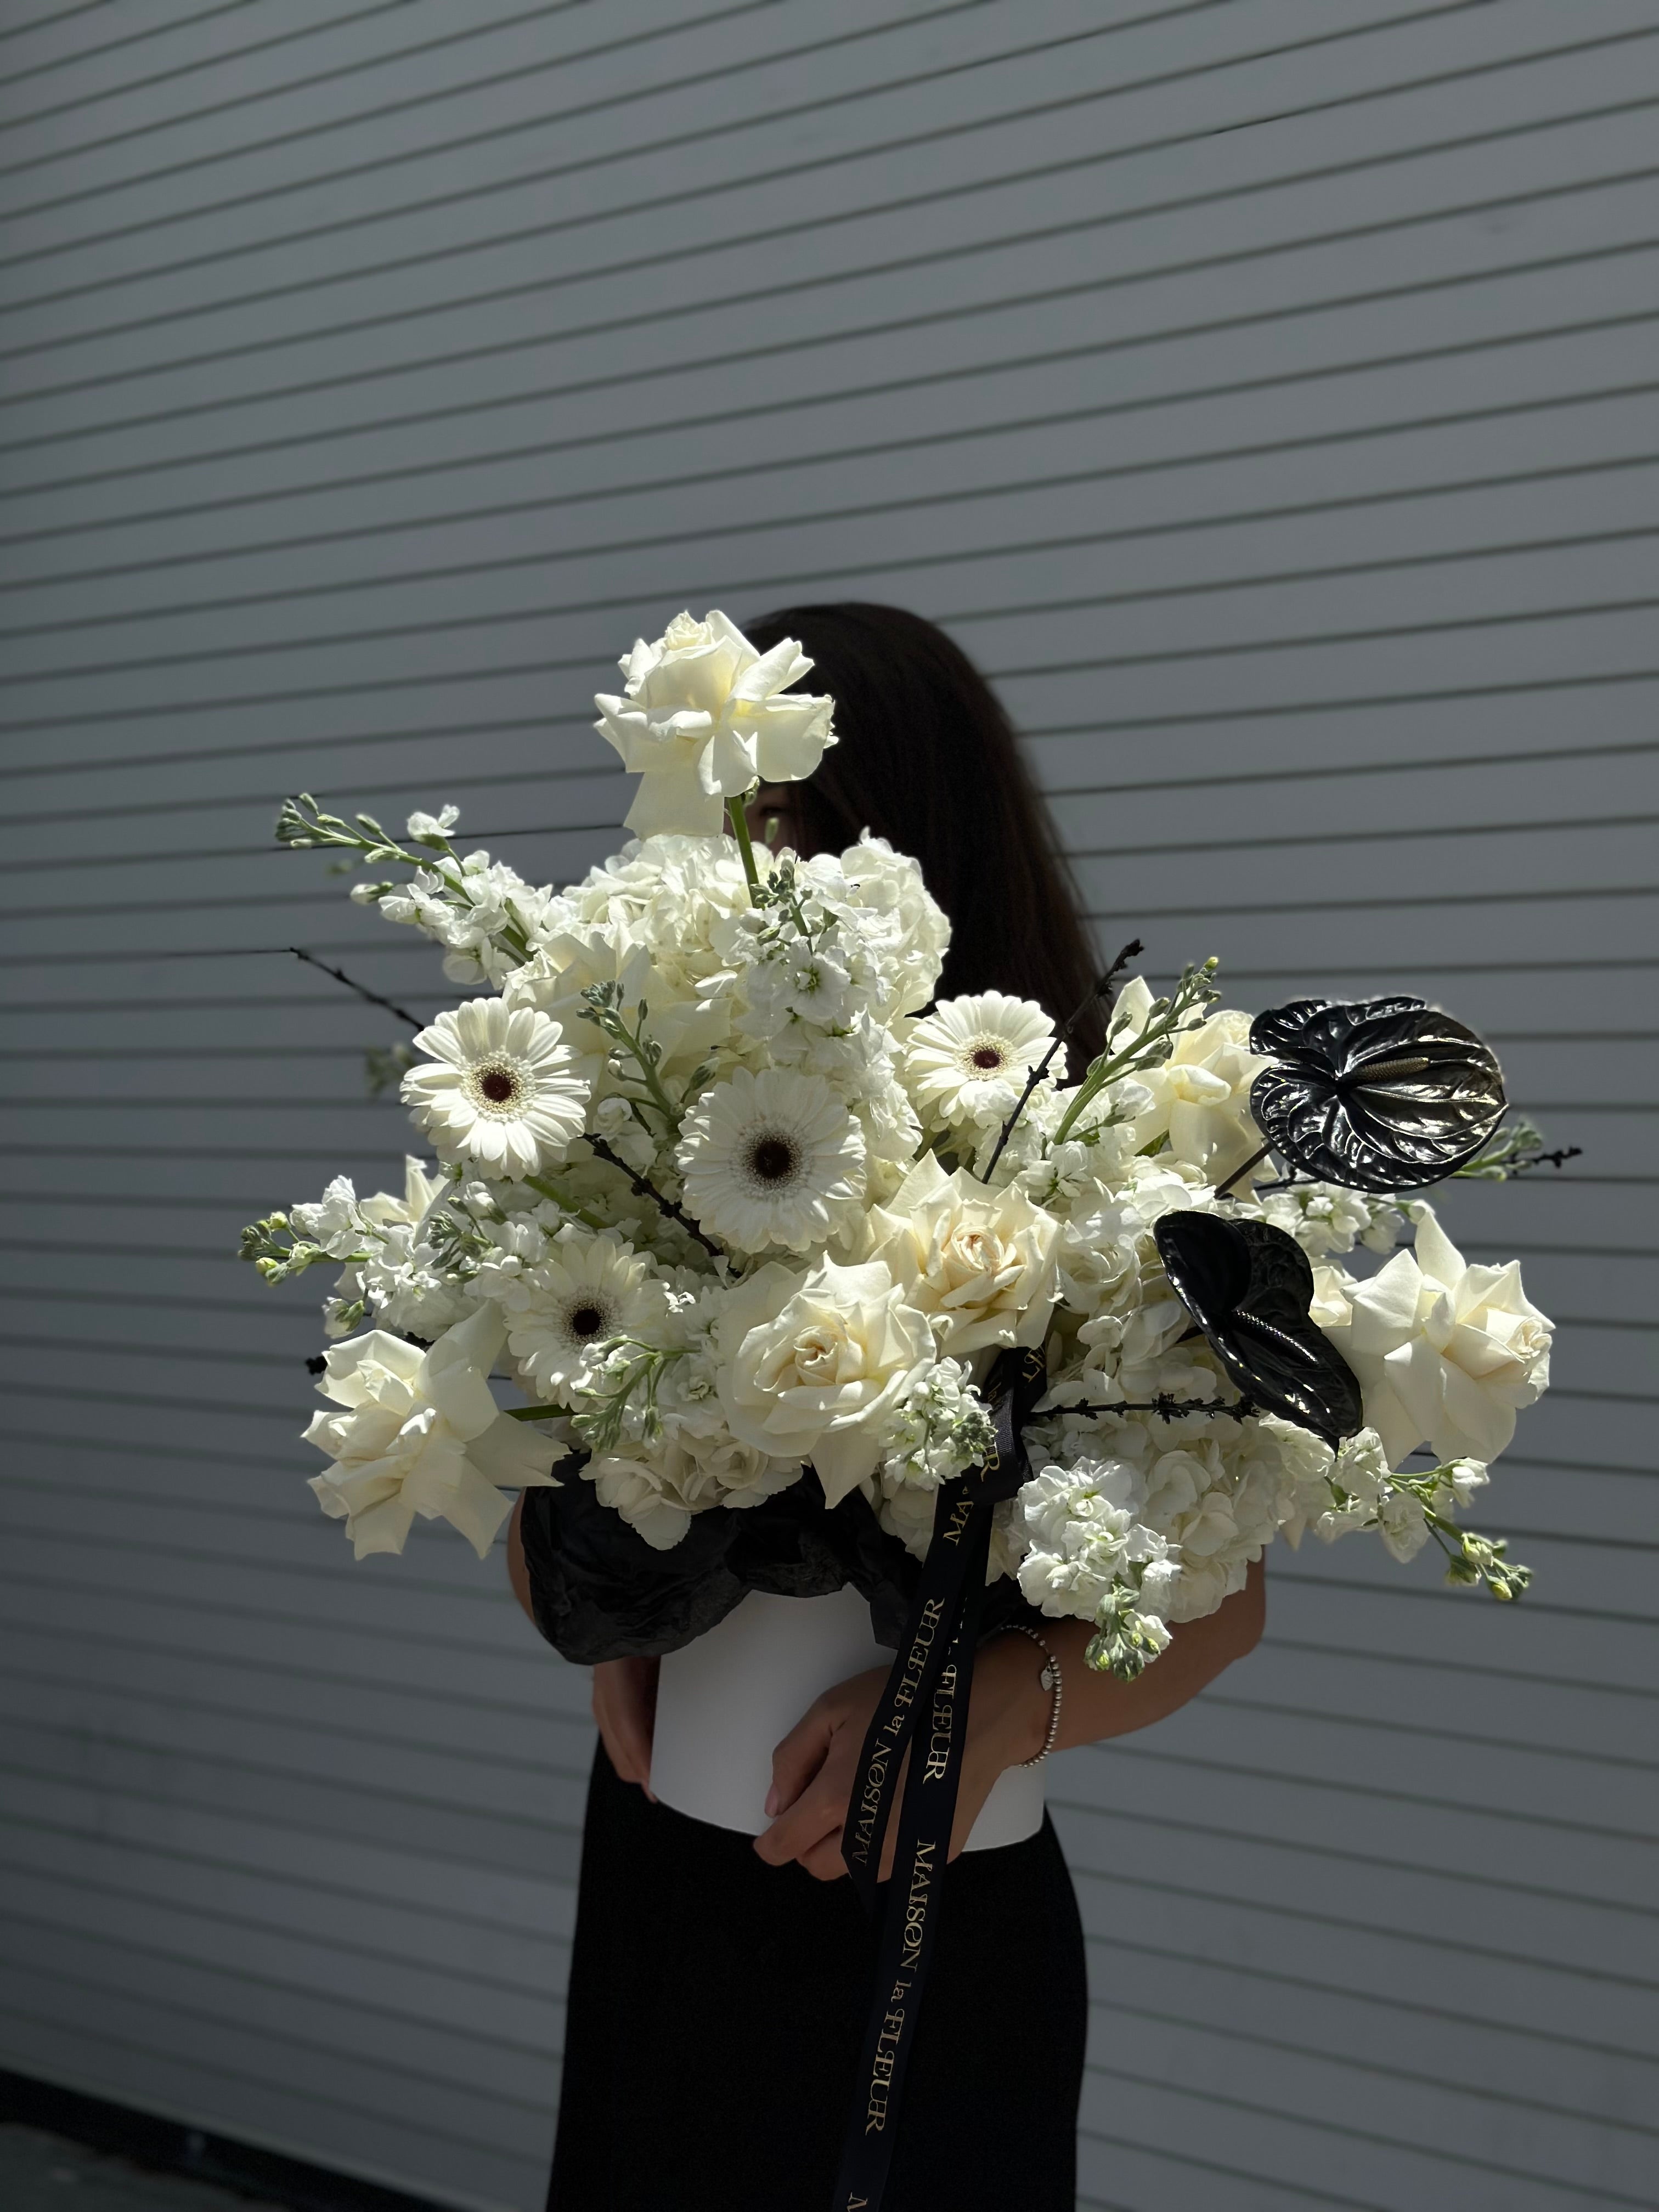 Belle Chance - white hydrangea, calla lilies, anemones, white roses, stock flowers